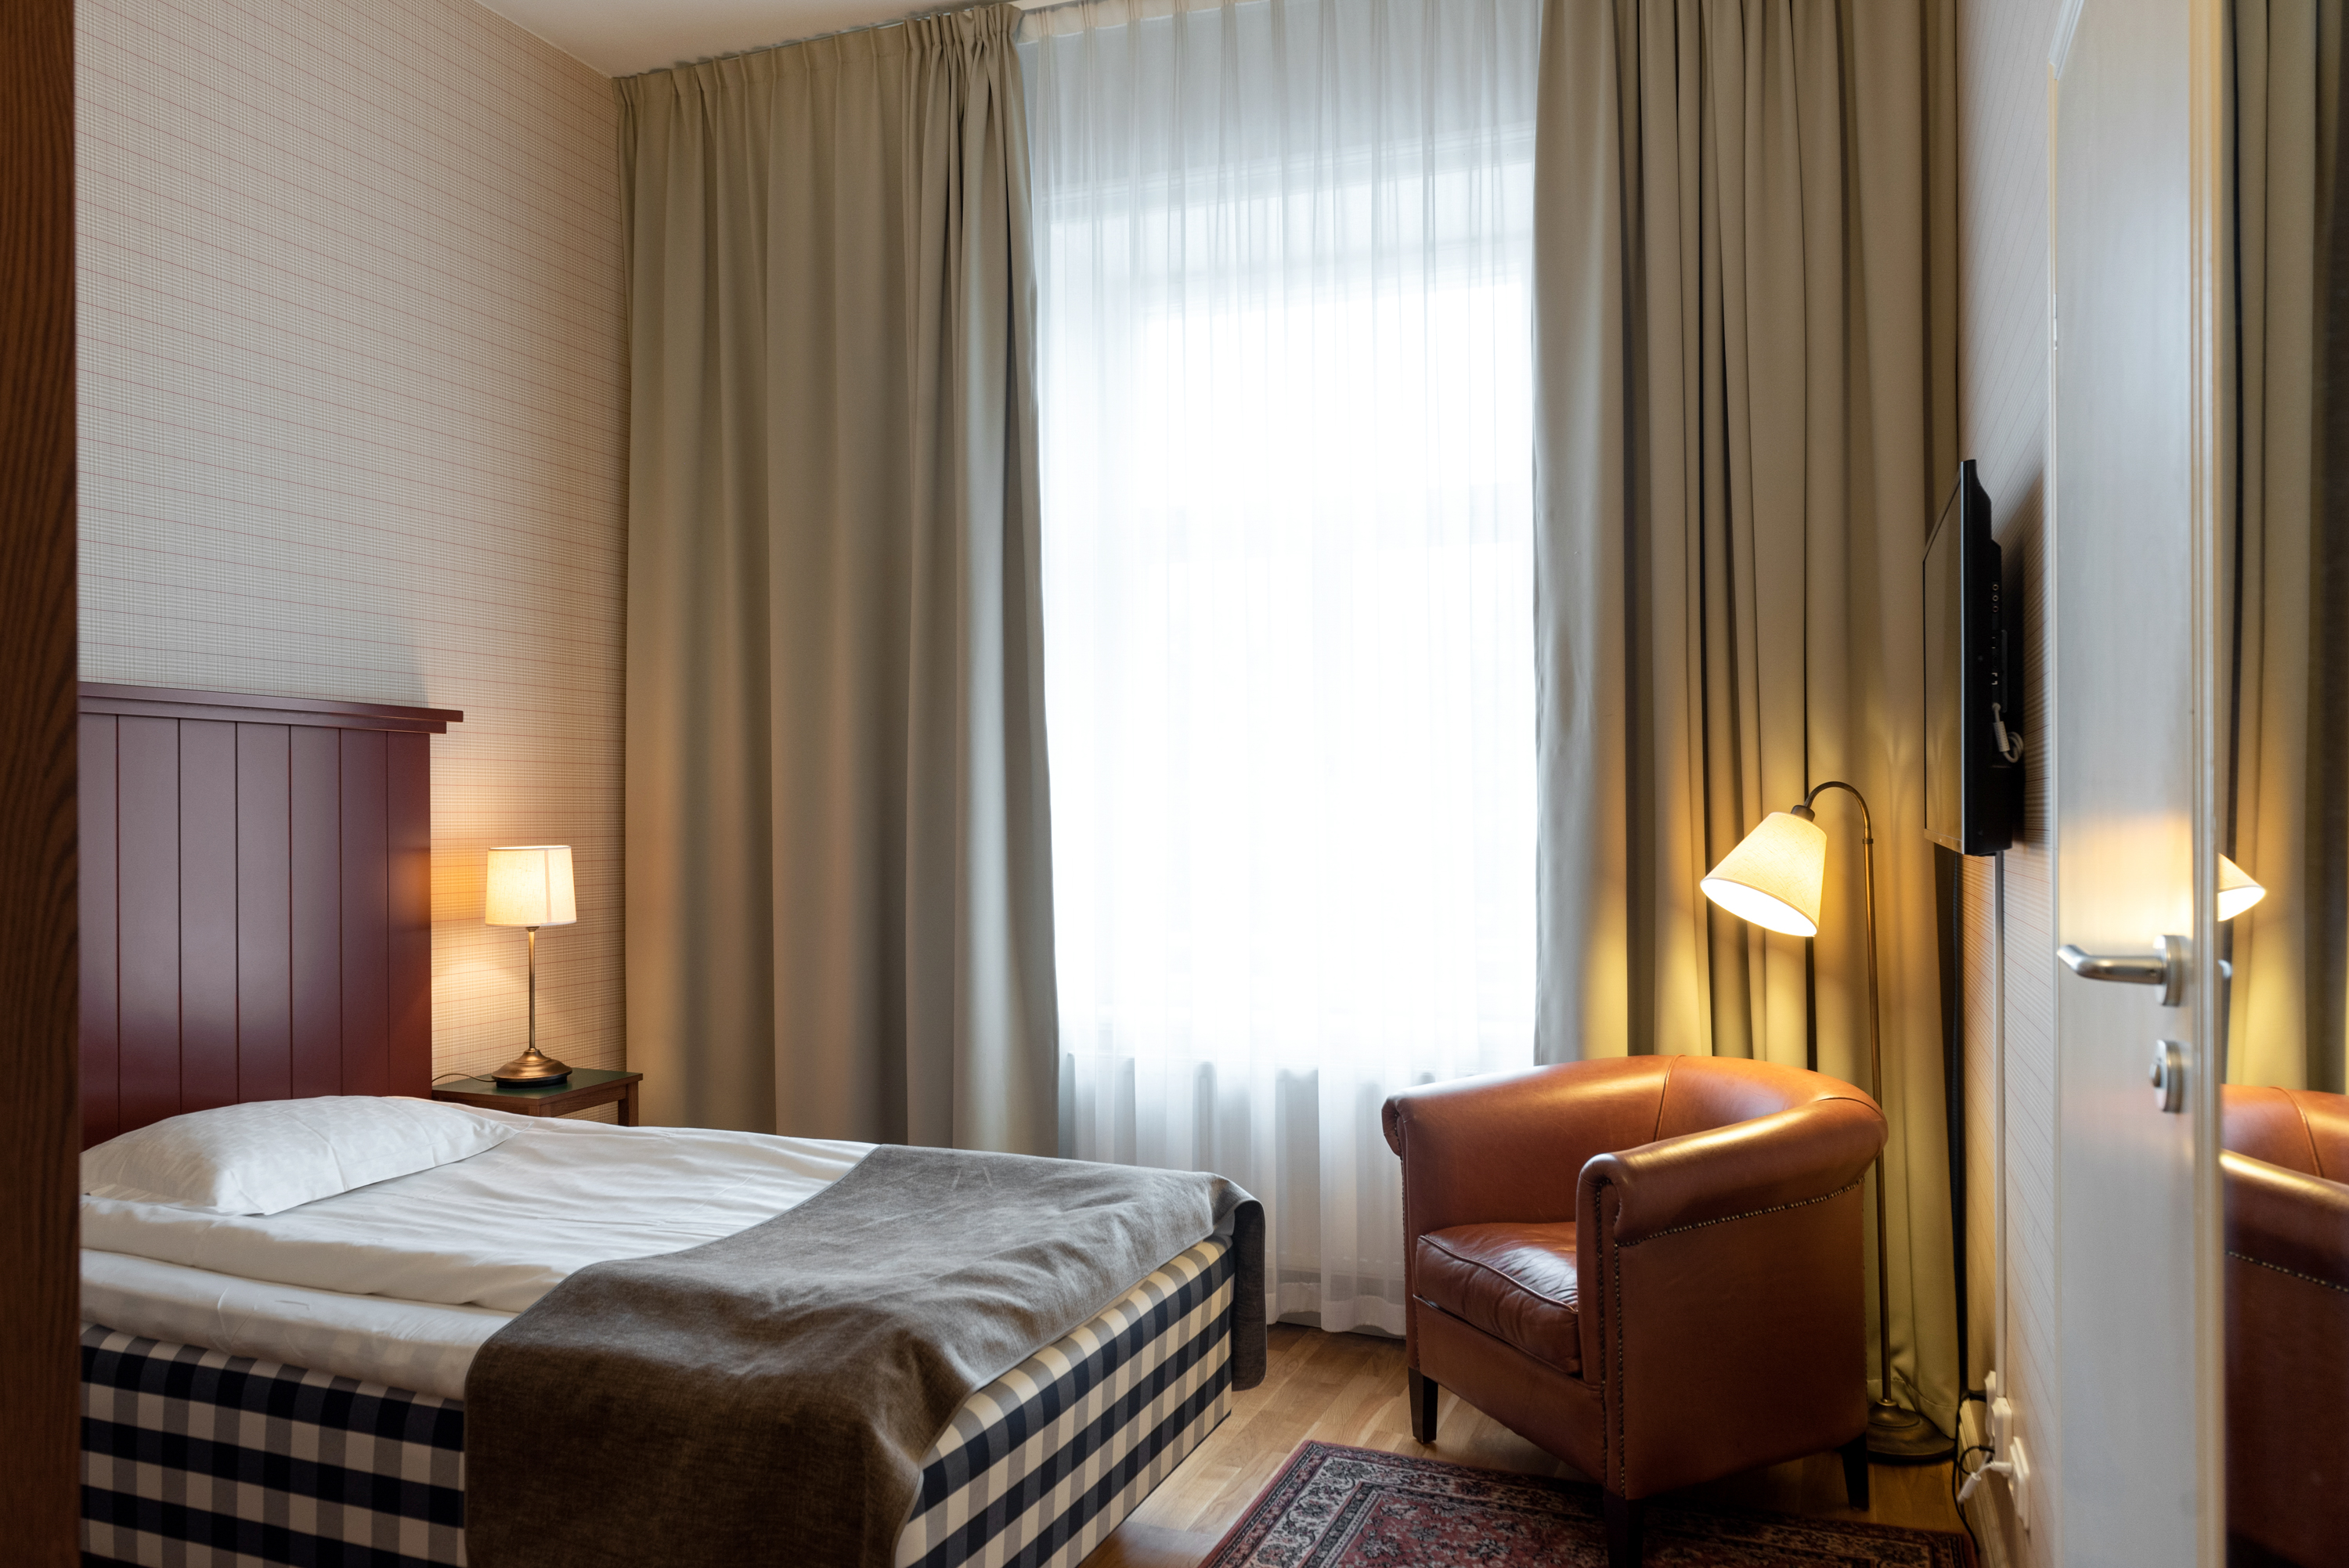 Hotel room with Hästens bed, leather armchair and window